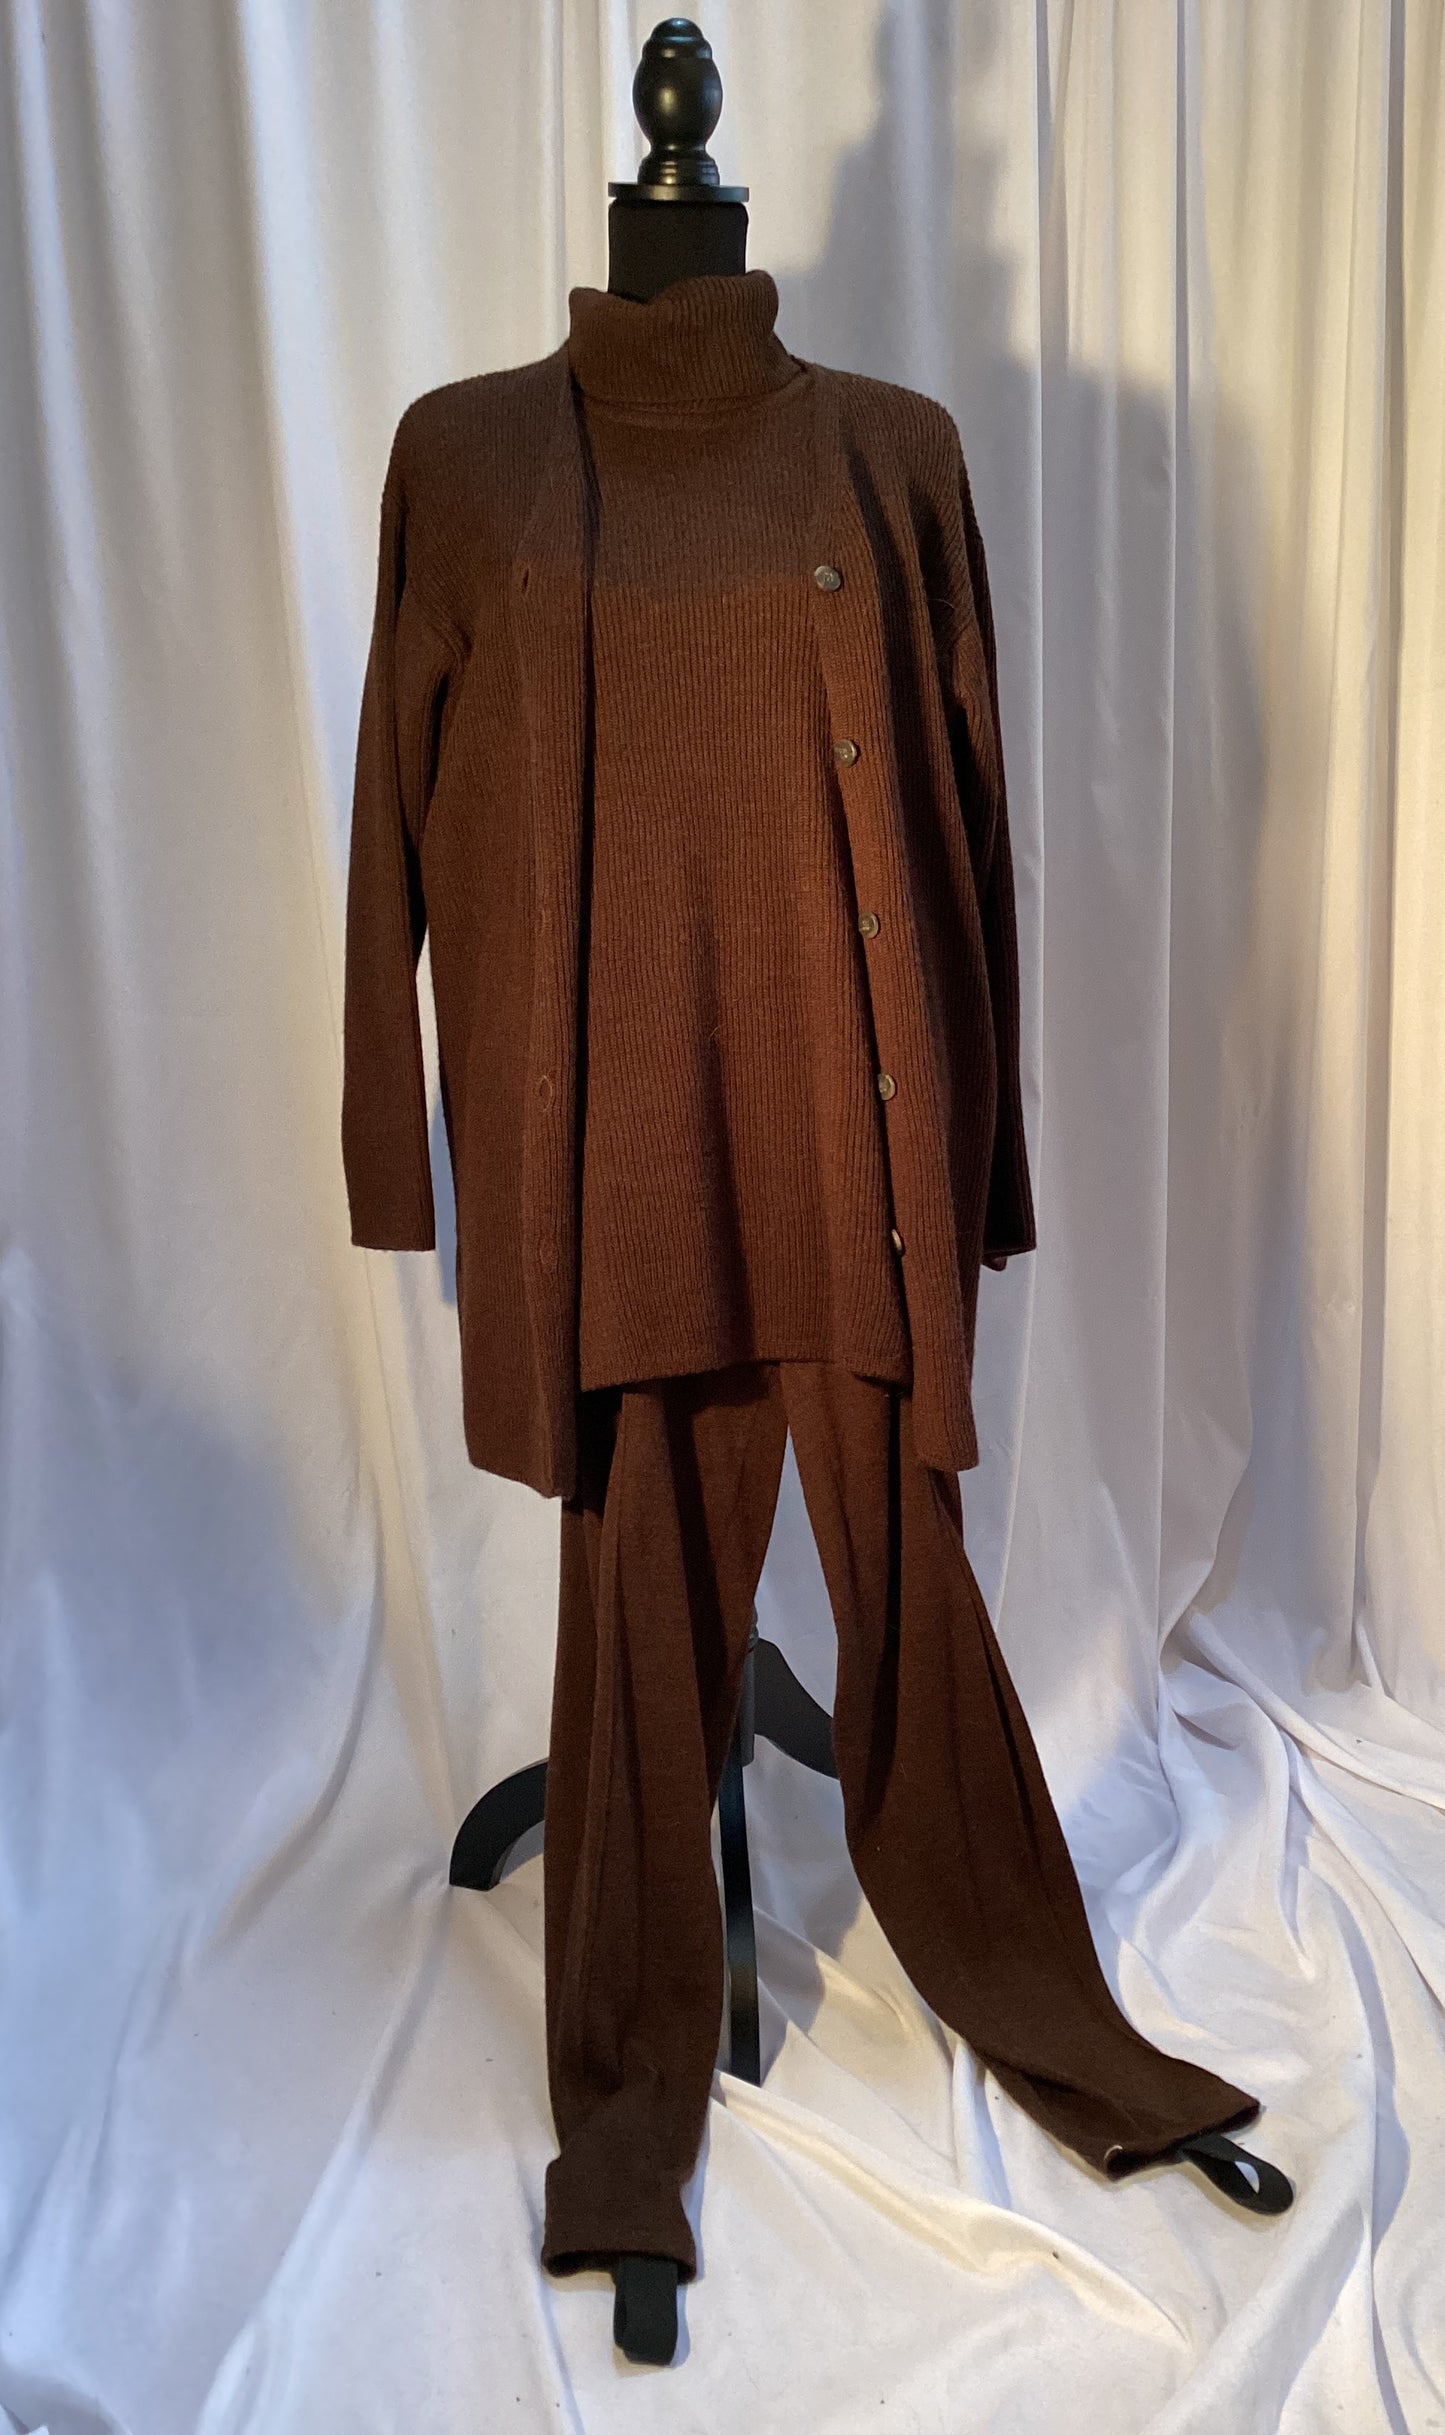 3 Piece Jeanne Pierre Wool and Acrylic Pants Suit